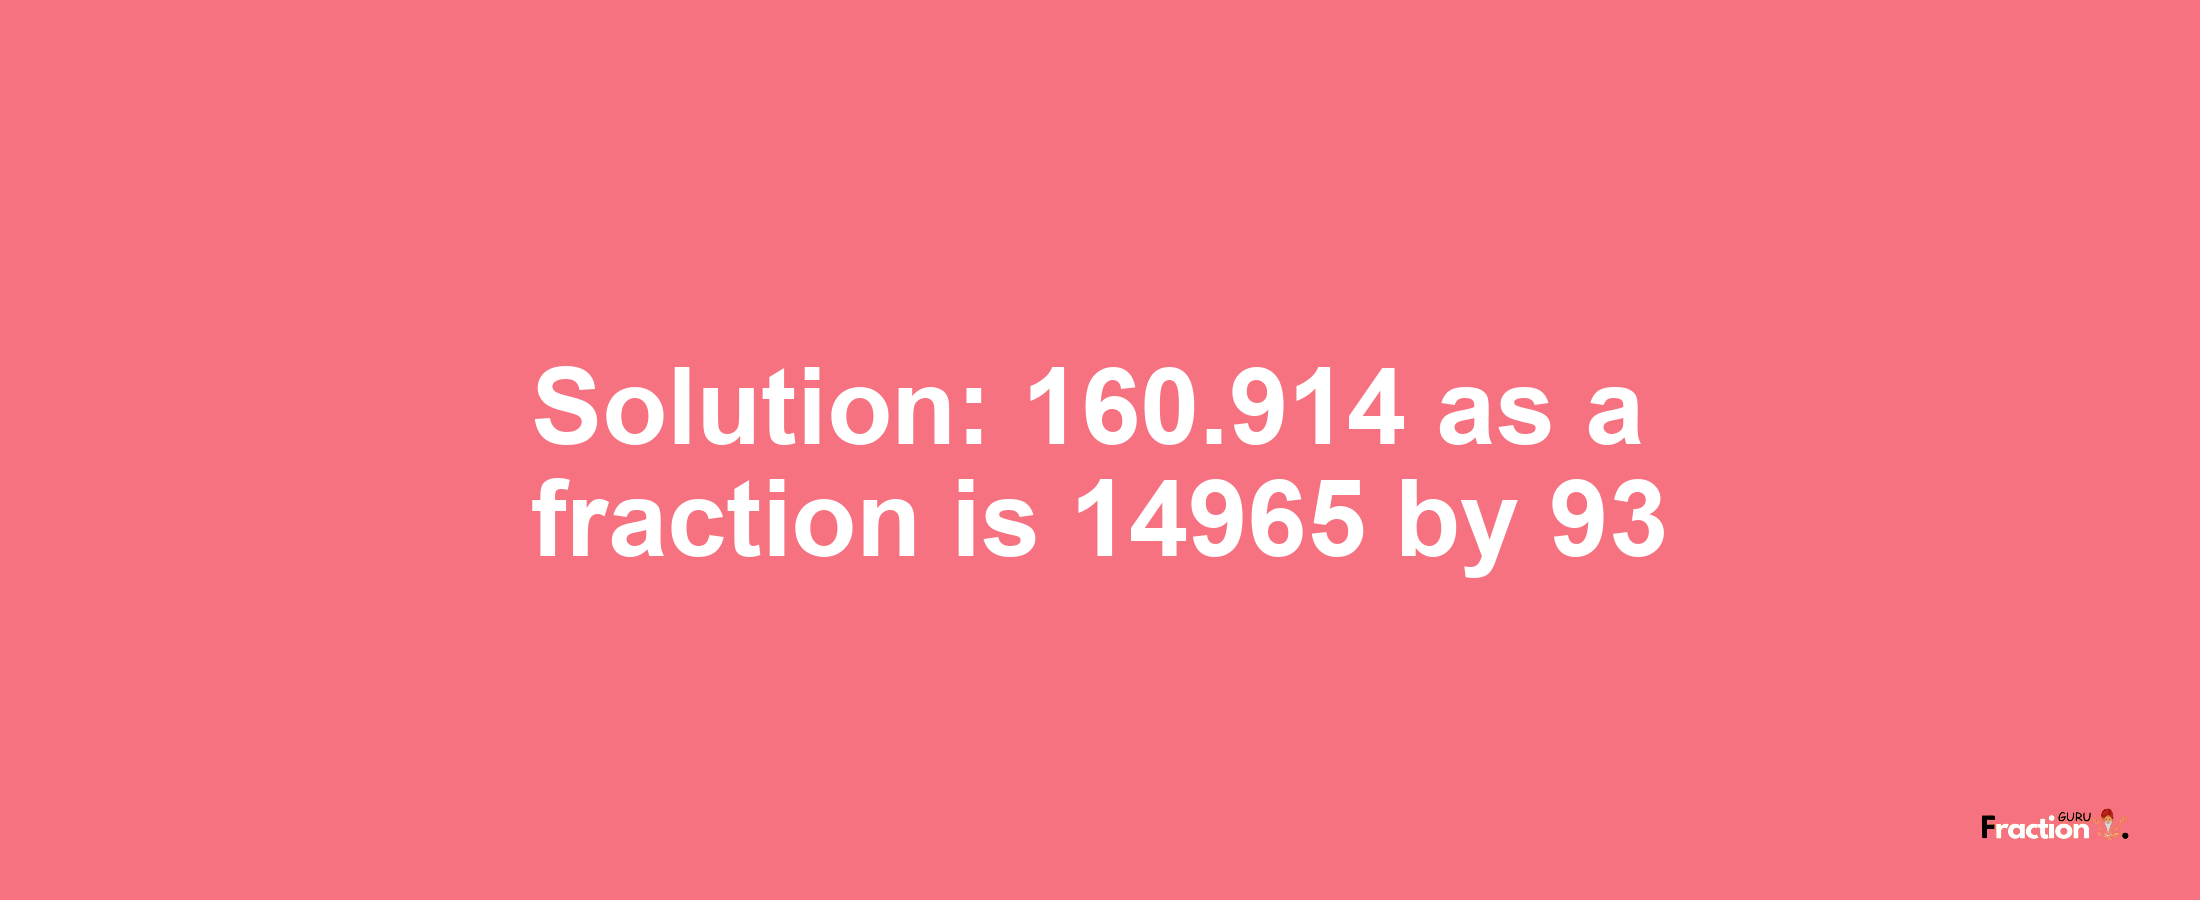 Solution:160.914 as a fraction is 14965/93